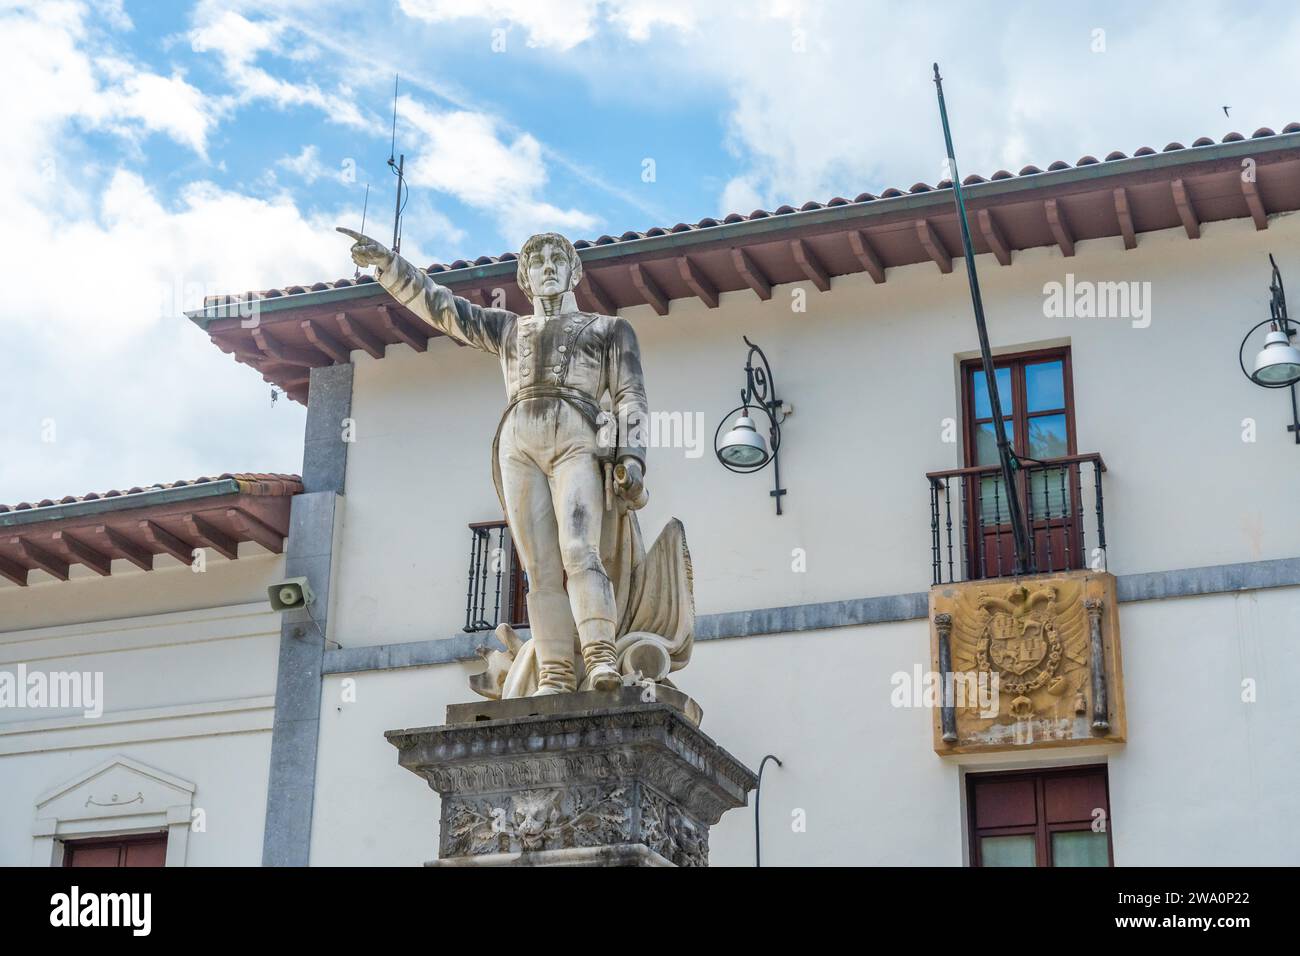 Statue in the Txurruka square next to the Asunción town hall in the coastal town of Mutriku, Basque Country Stock Photo